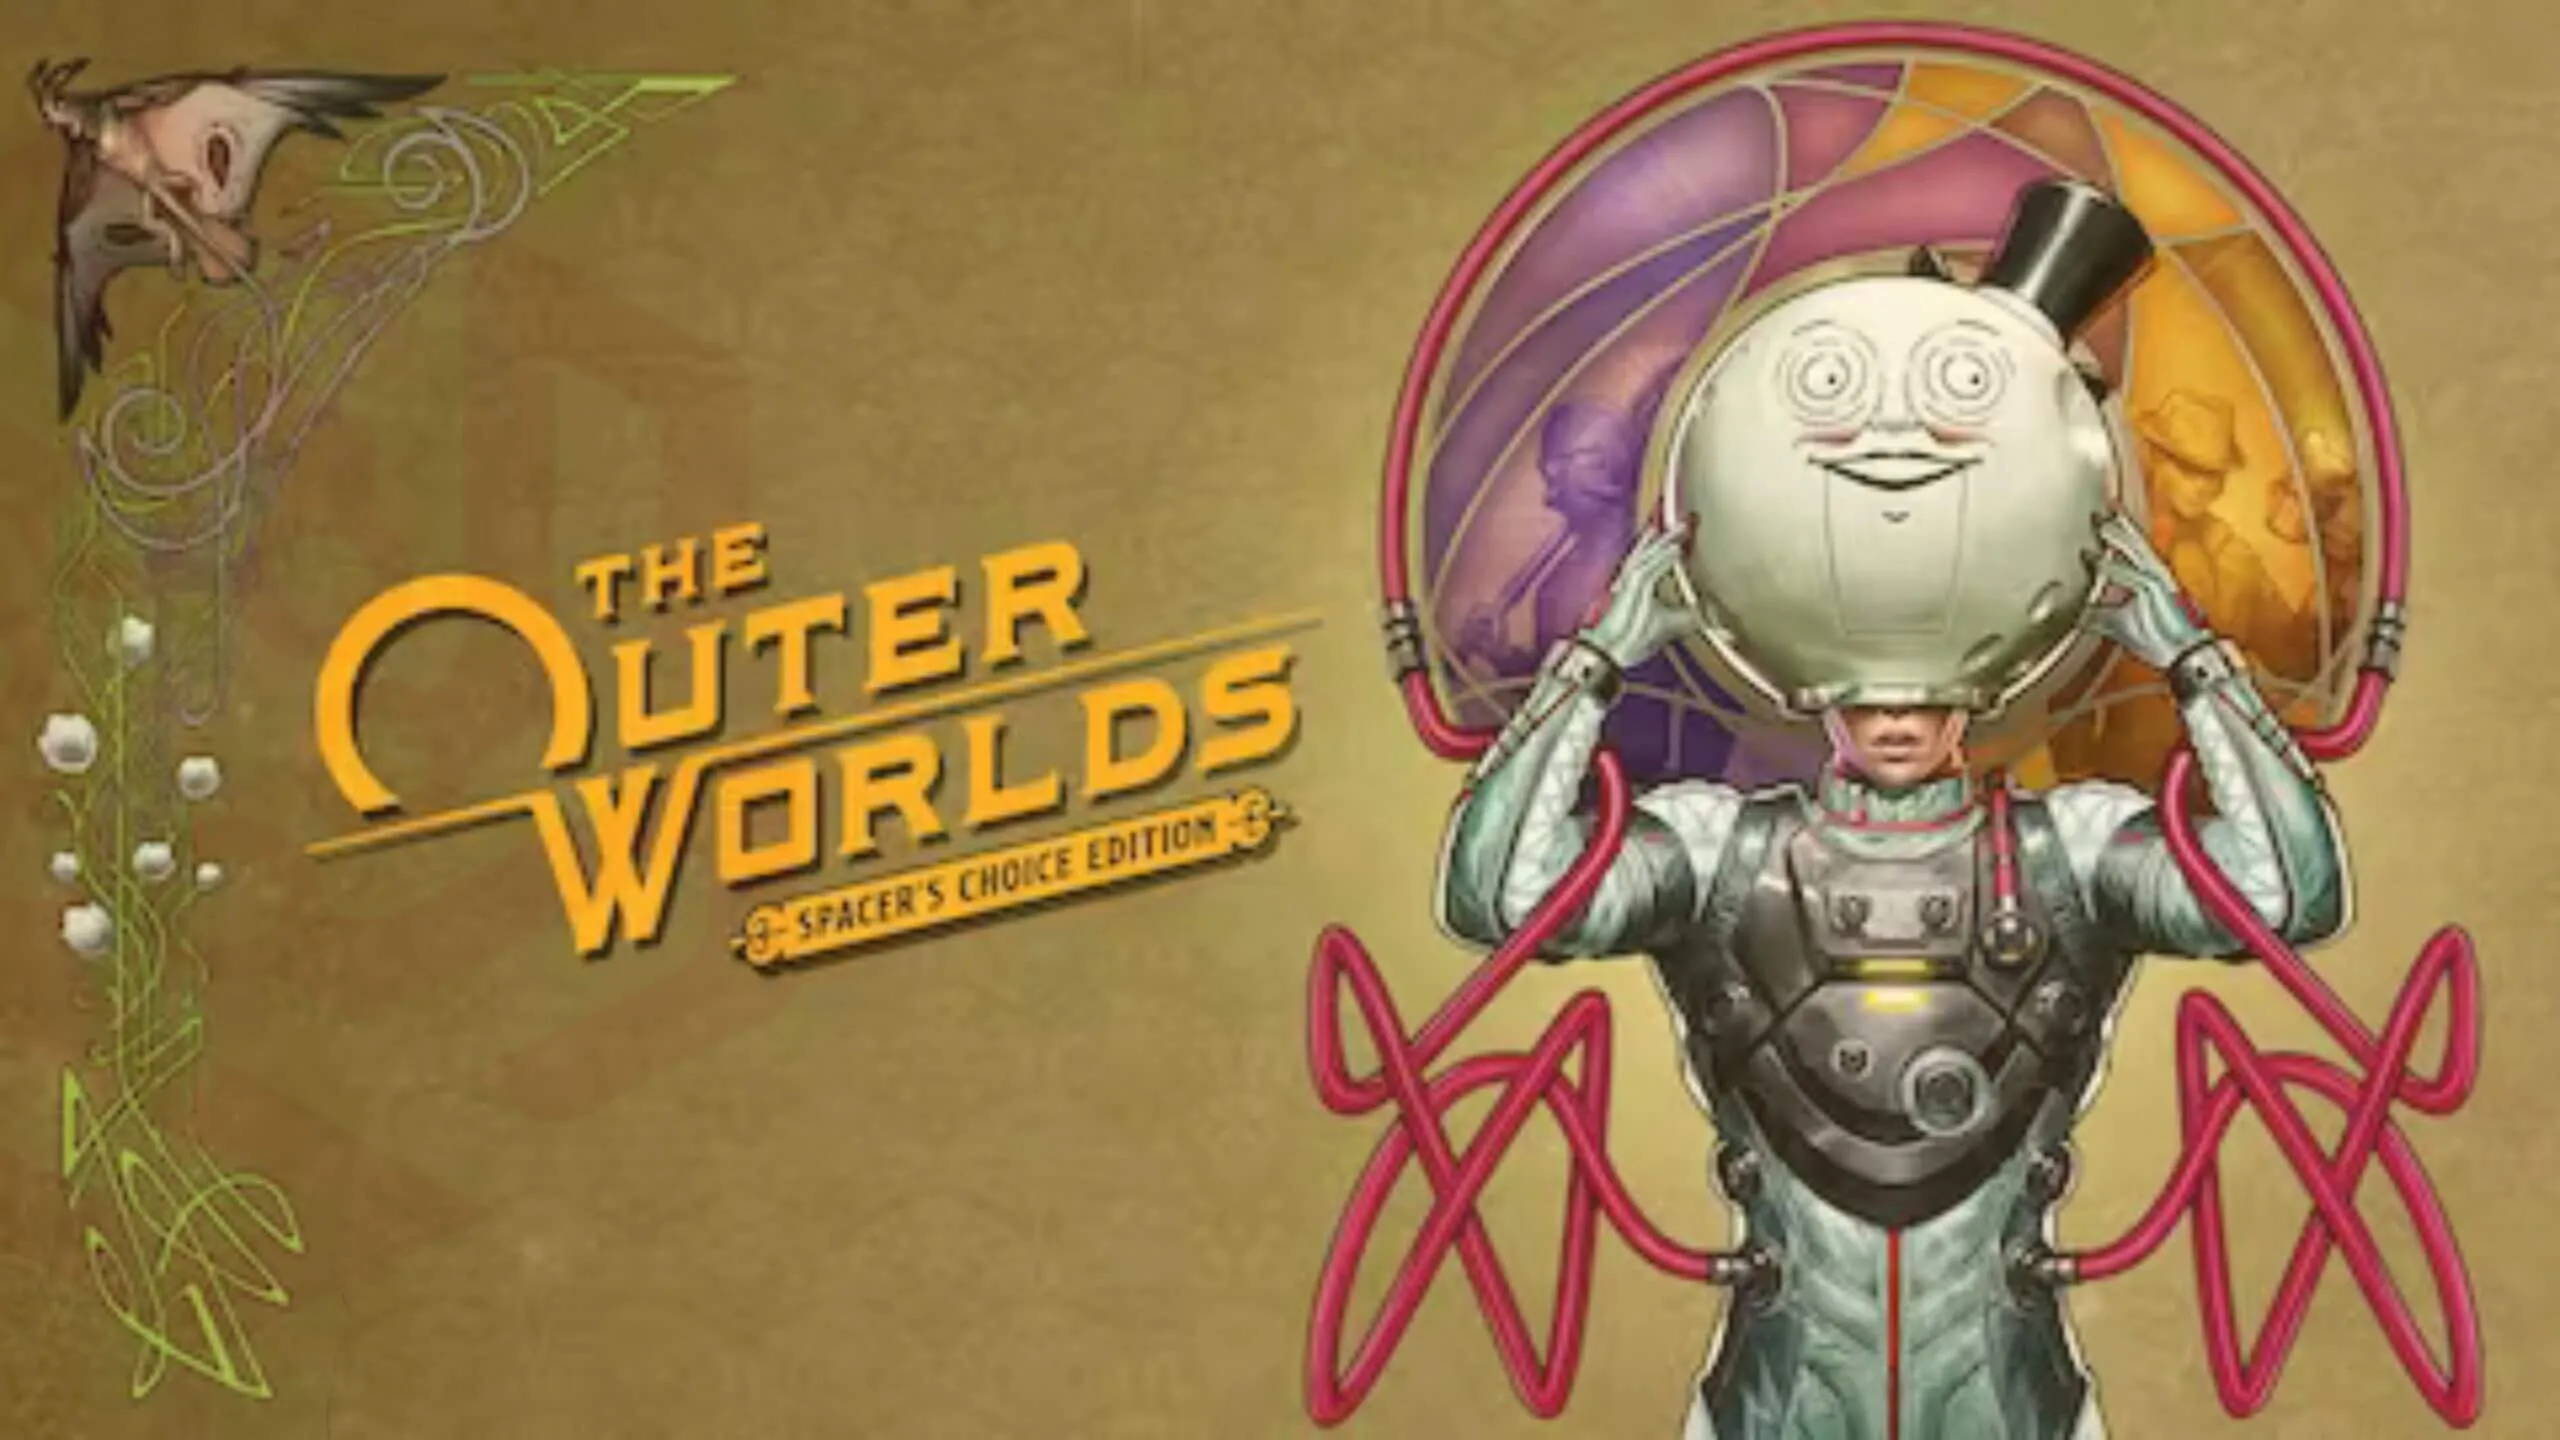 The Outer Worlds: Spacer's Choice Edition - A Christmas Gift from Epic Games Store.